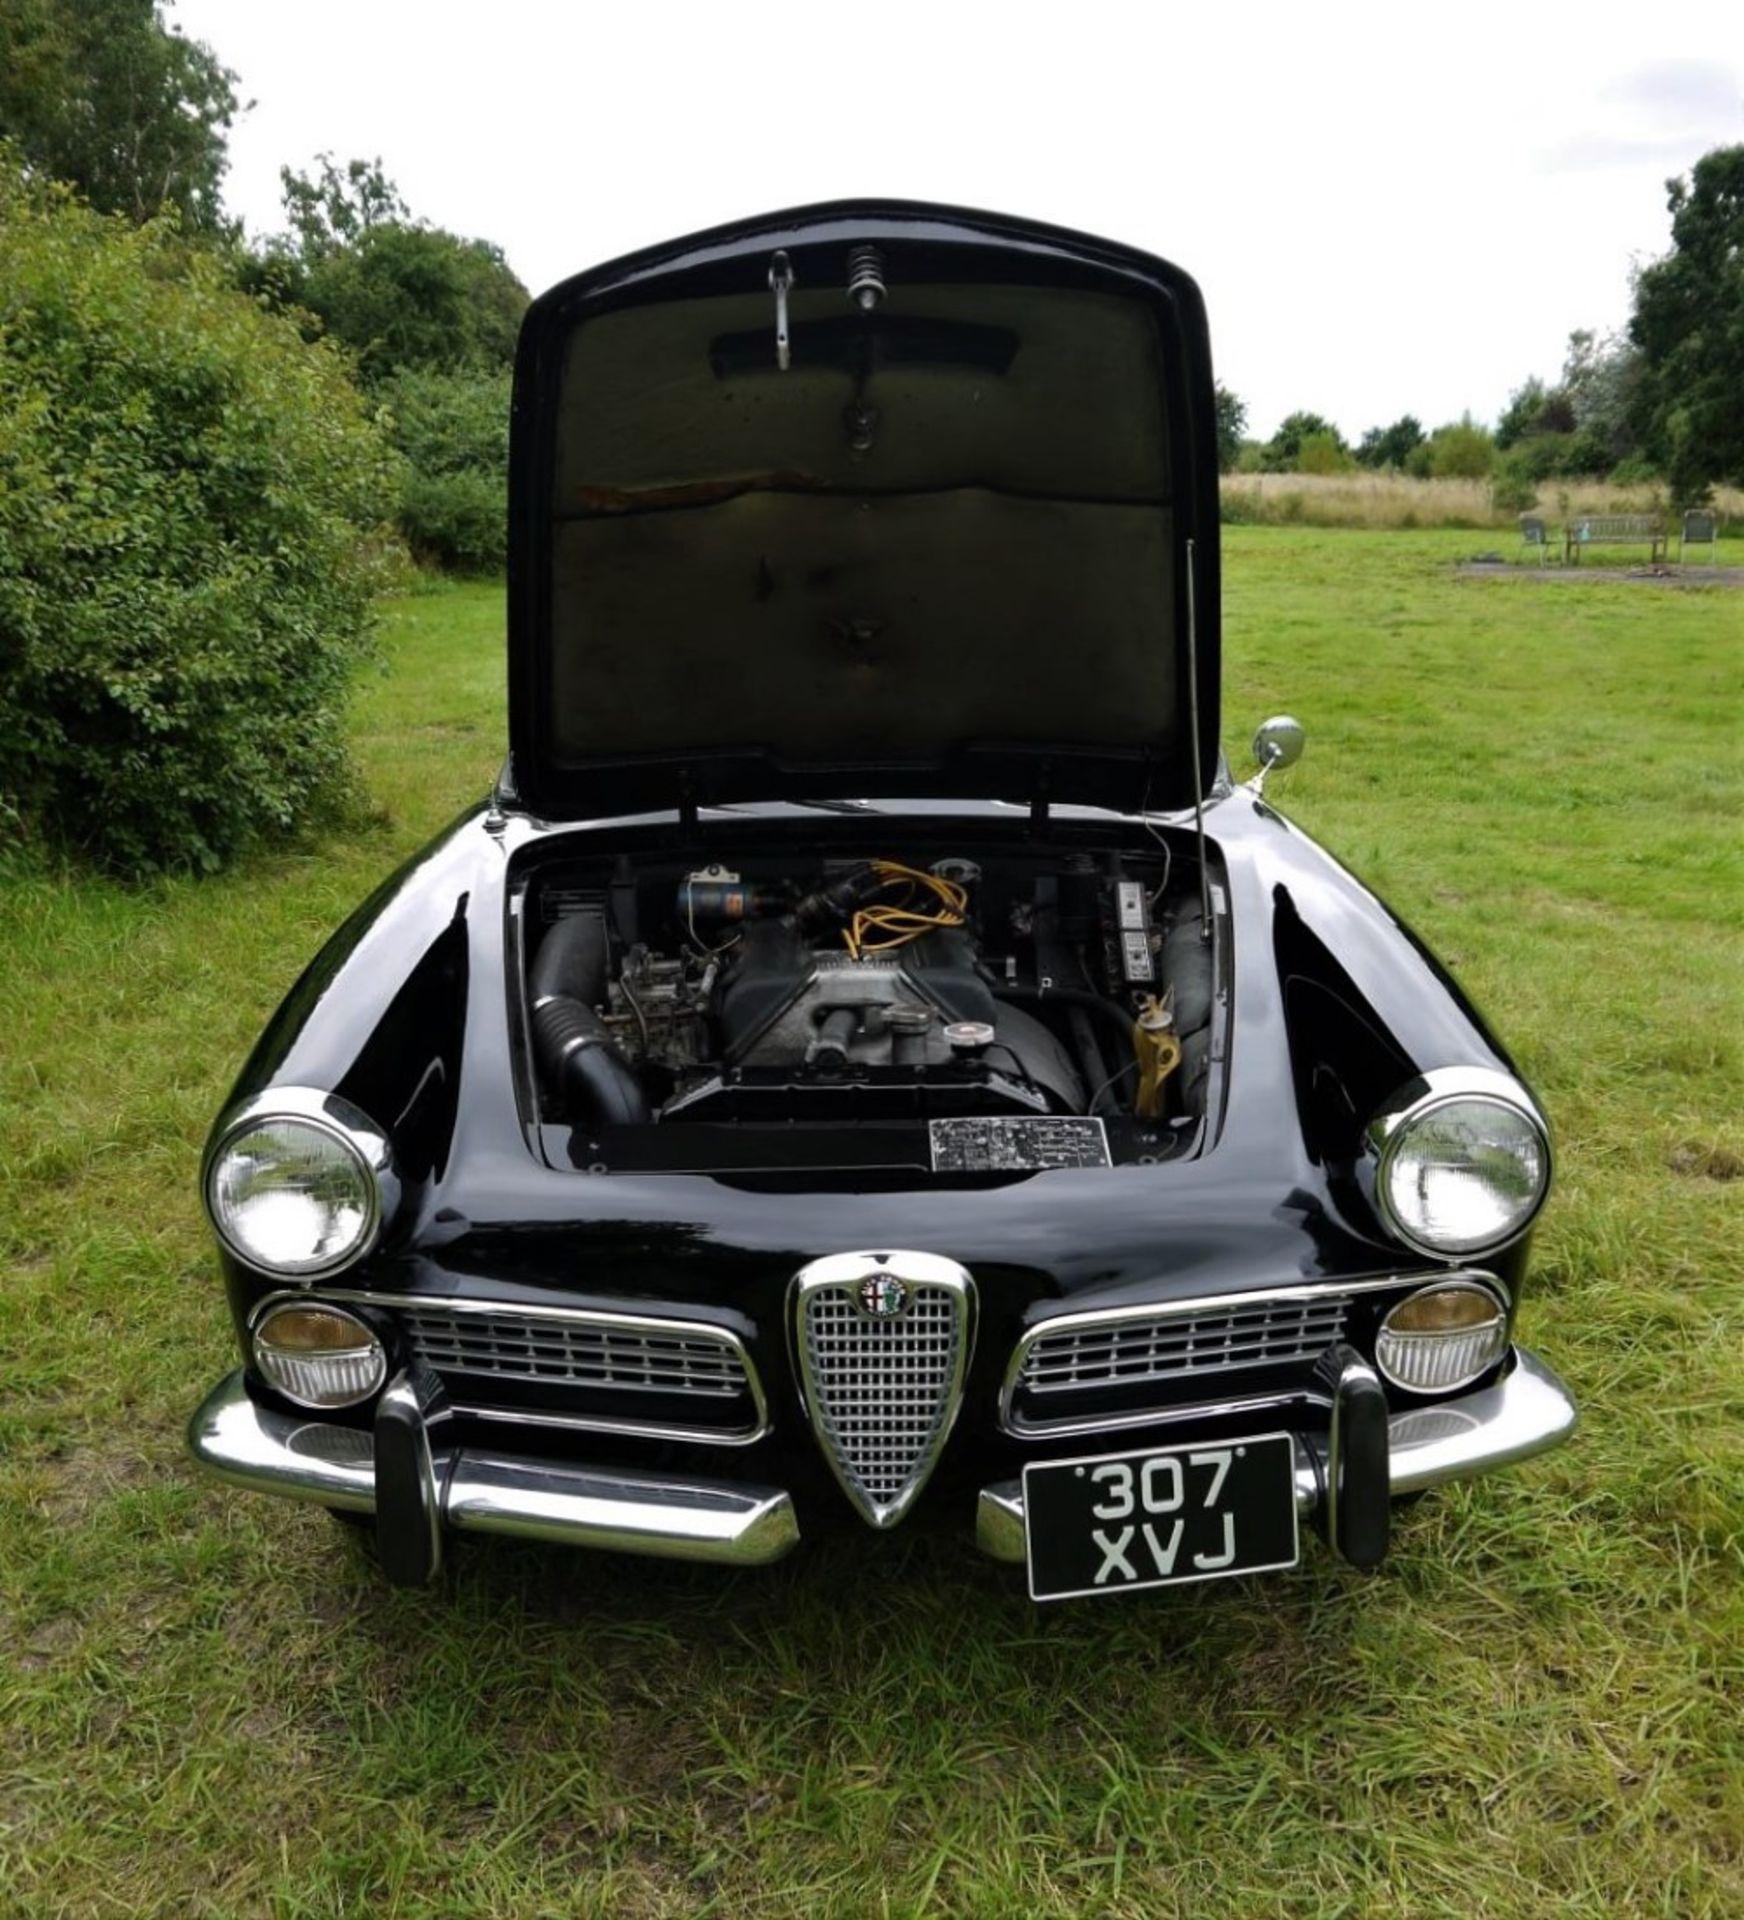 1960 ALFA ROMEO TOURING SPIDER Registration Number: 307 XVJ Chassis Number: AR*10204*000517 Recorded - Image 12 of 36